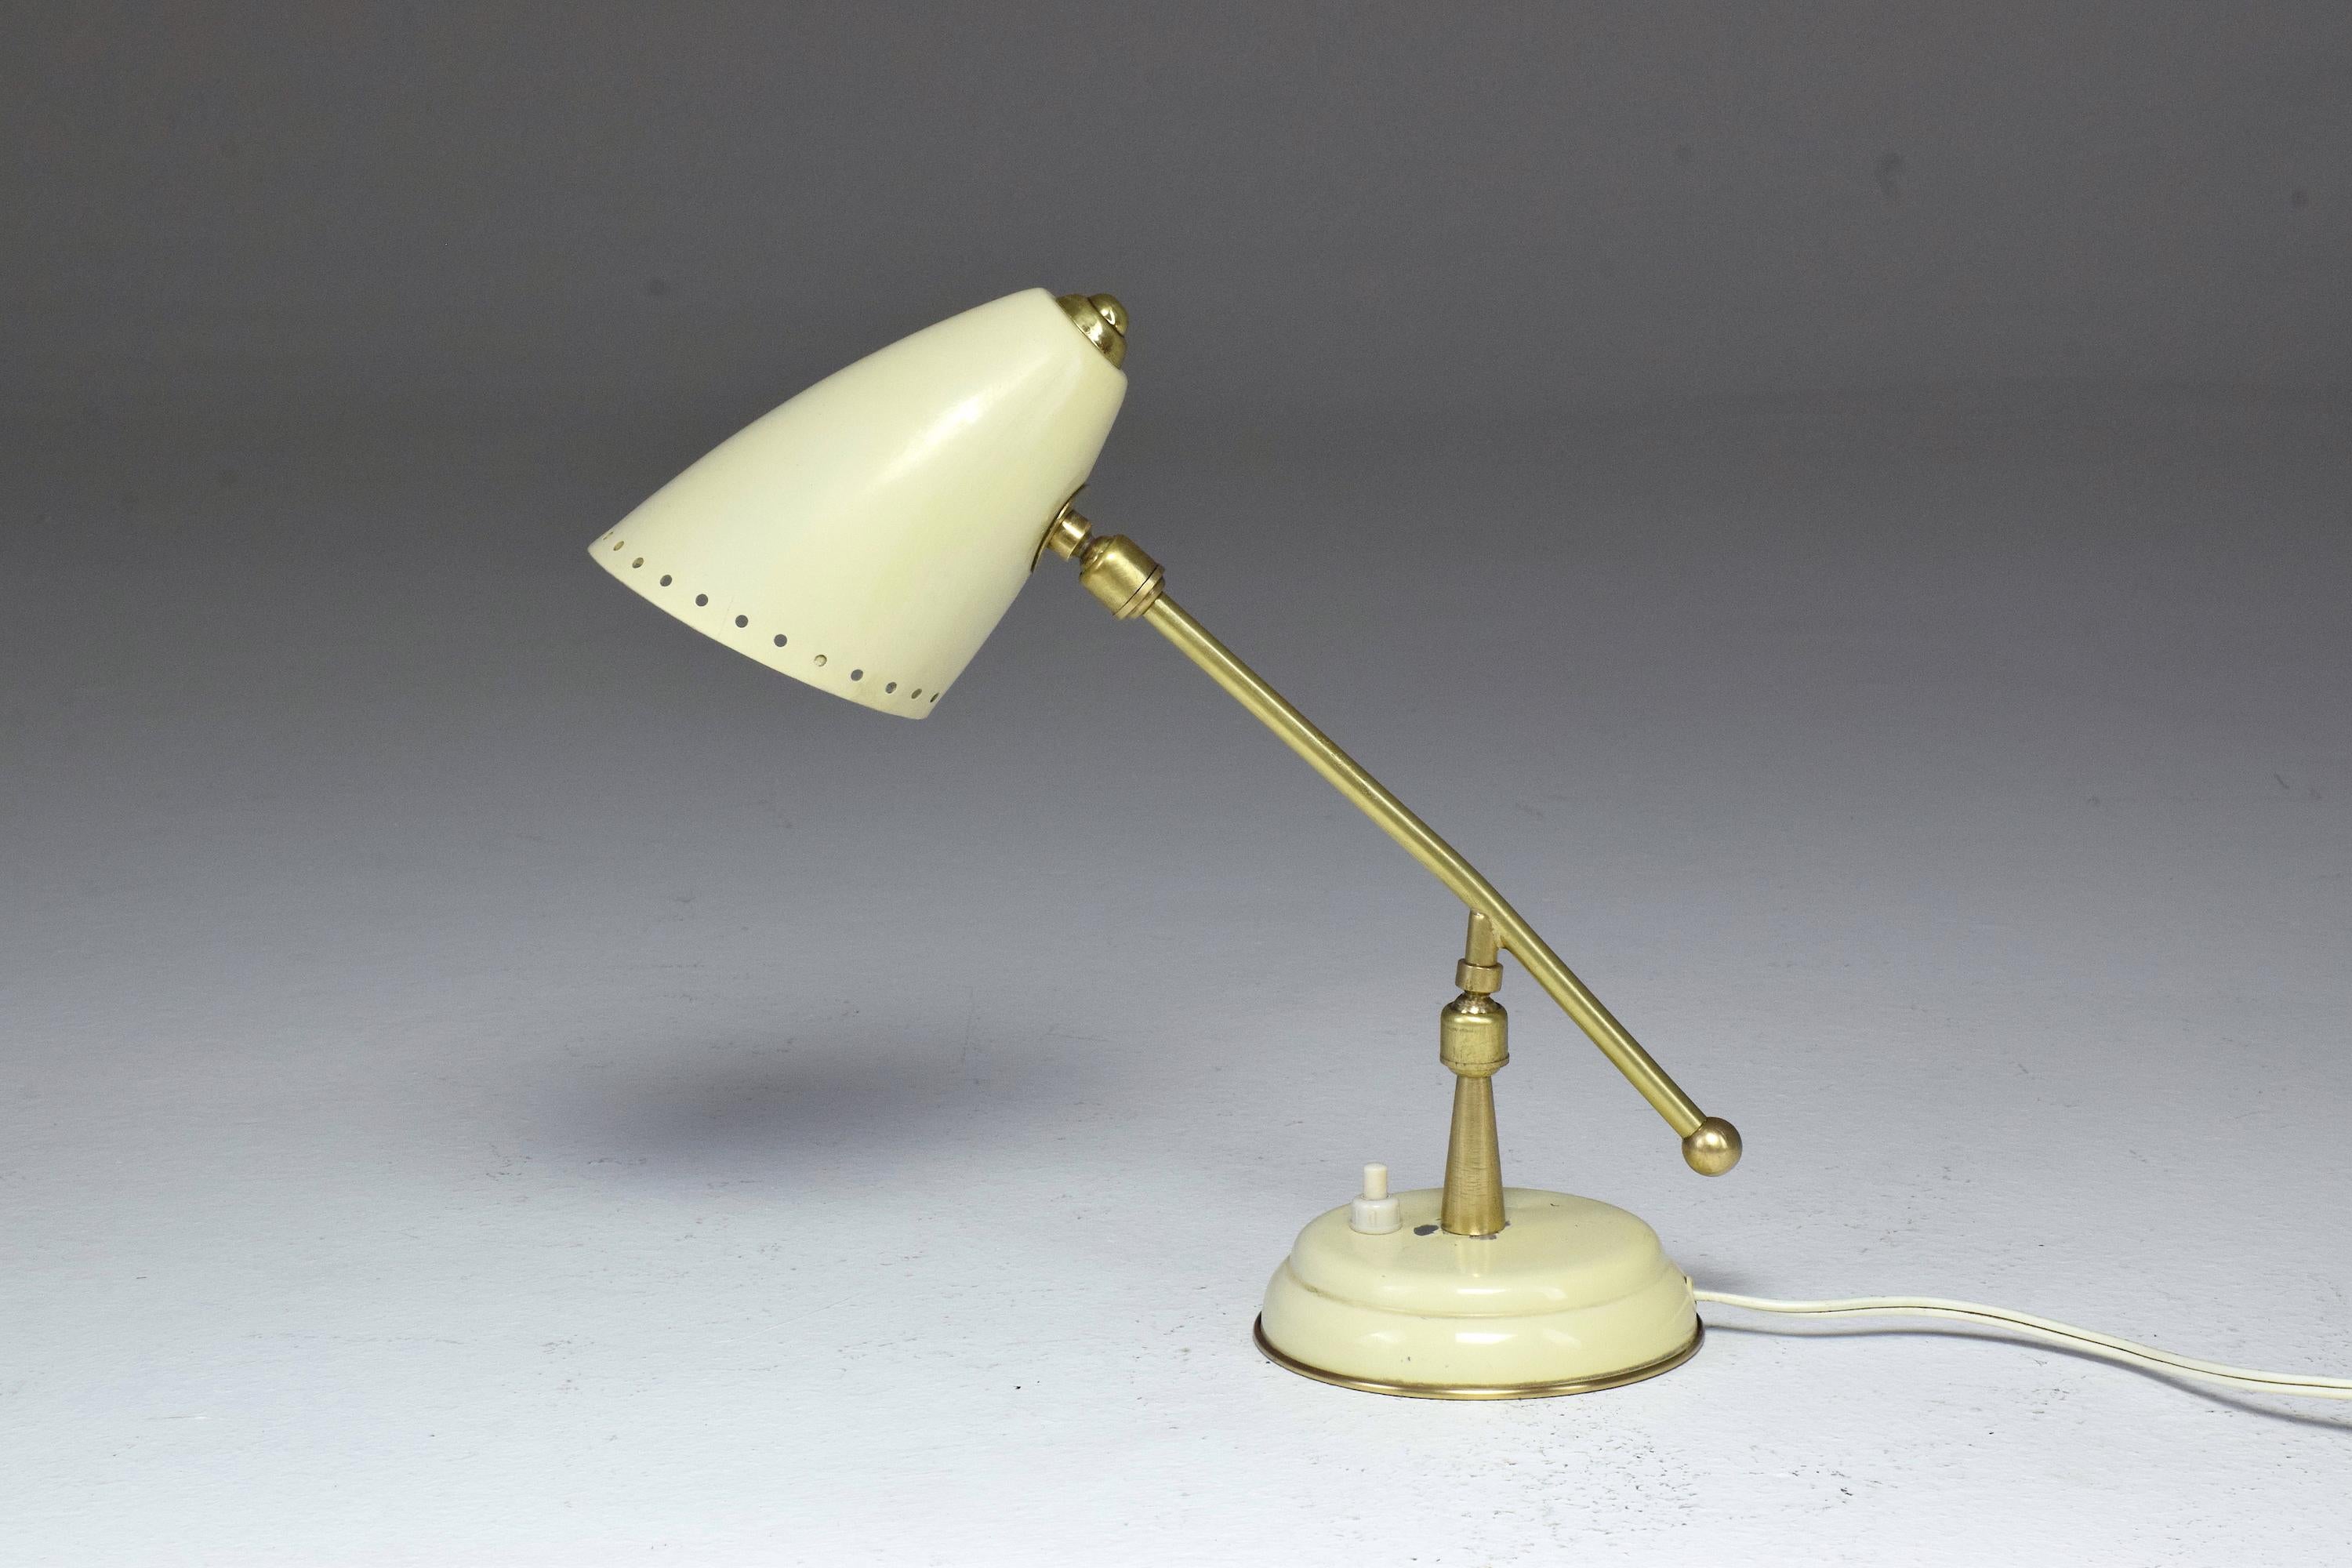 A 20th century vintage Italian table or desk lamp design with a polished brass stem, double articulation and a perforated cocotte shade. The lamp adjusts in height, length and width. The shade and base are in lacquered beige aluminum and the push